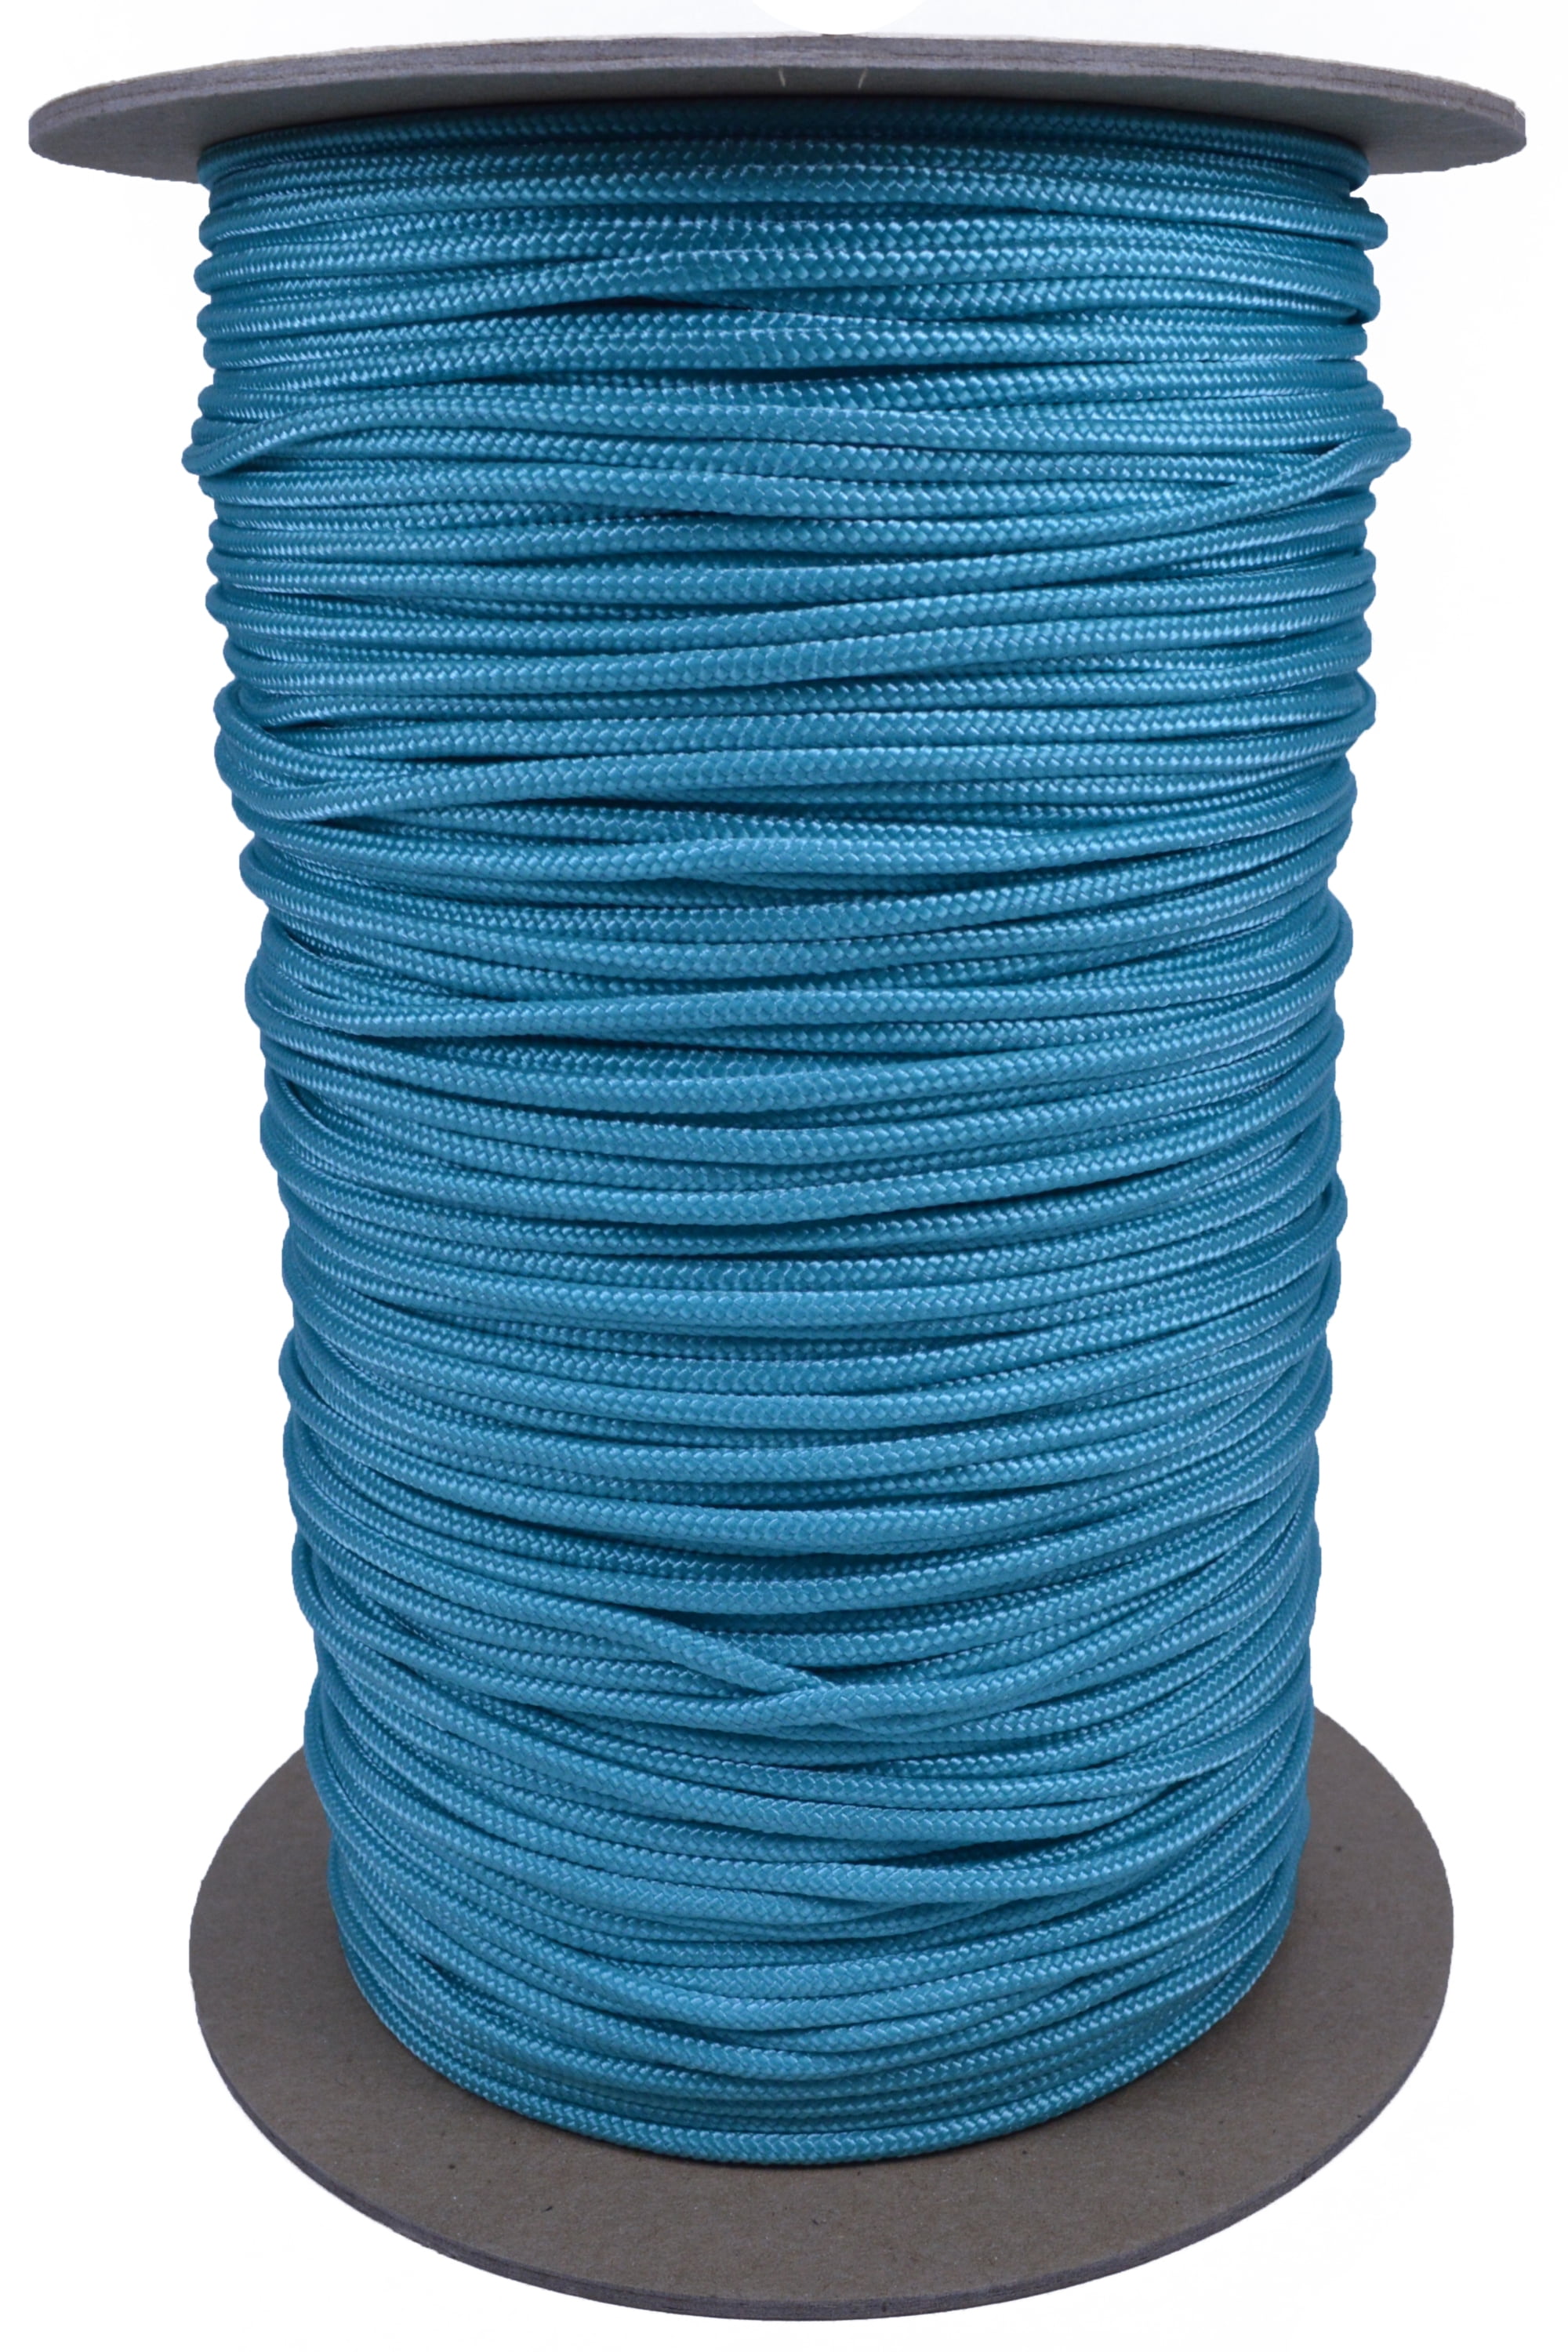 Neon Turquoise 425 Paracord (3-Strand) - Spools